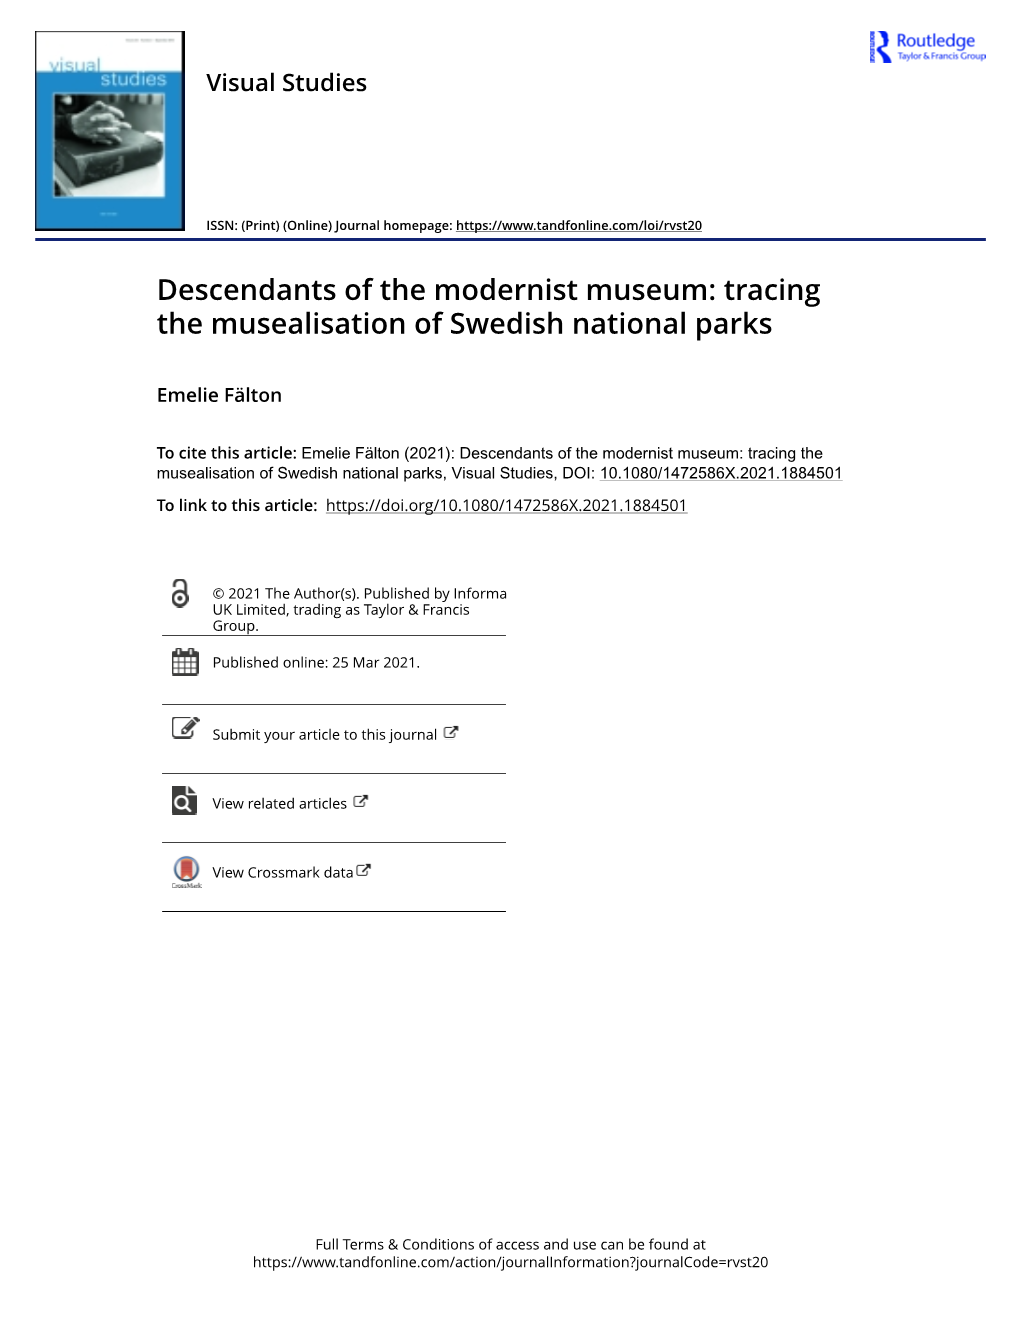 Tracing the Musealisation of Swedish National Parks